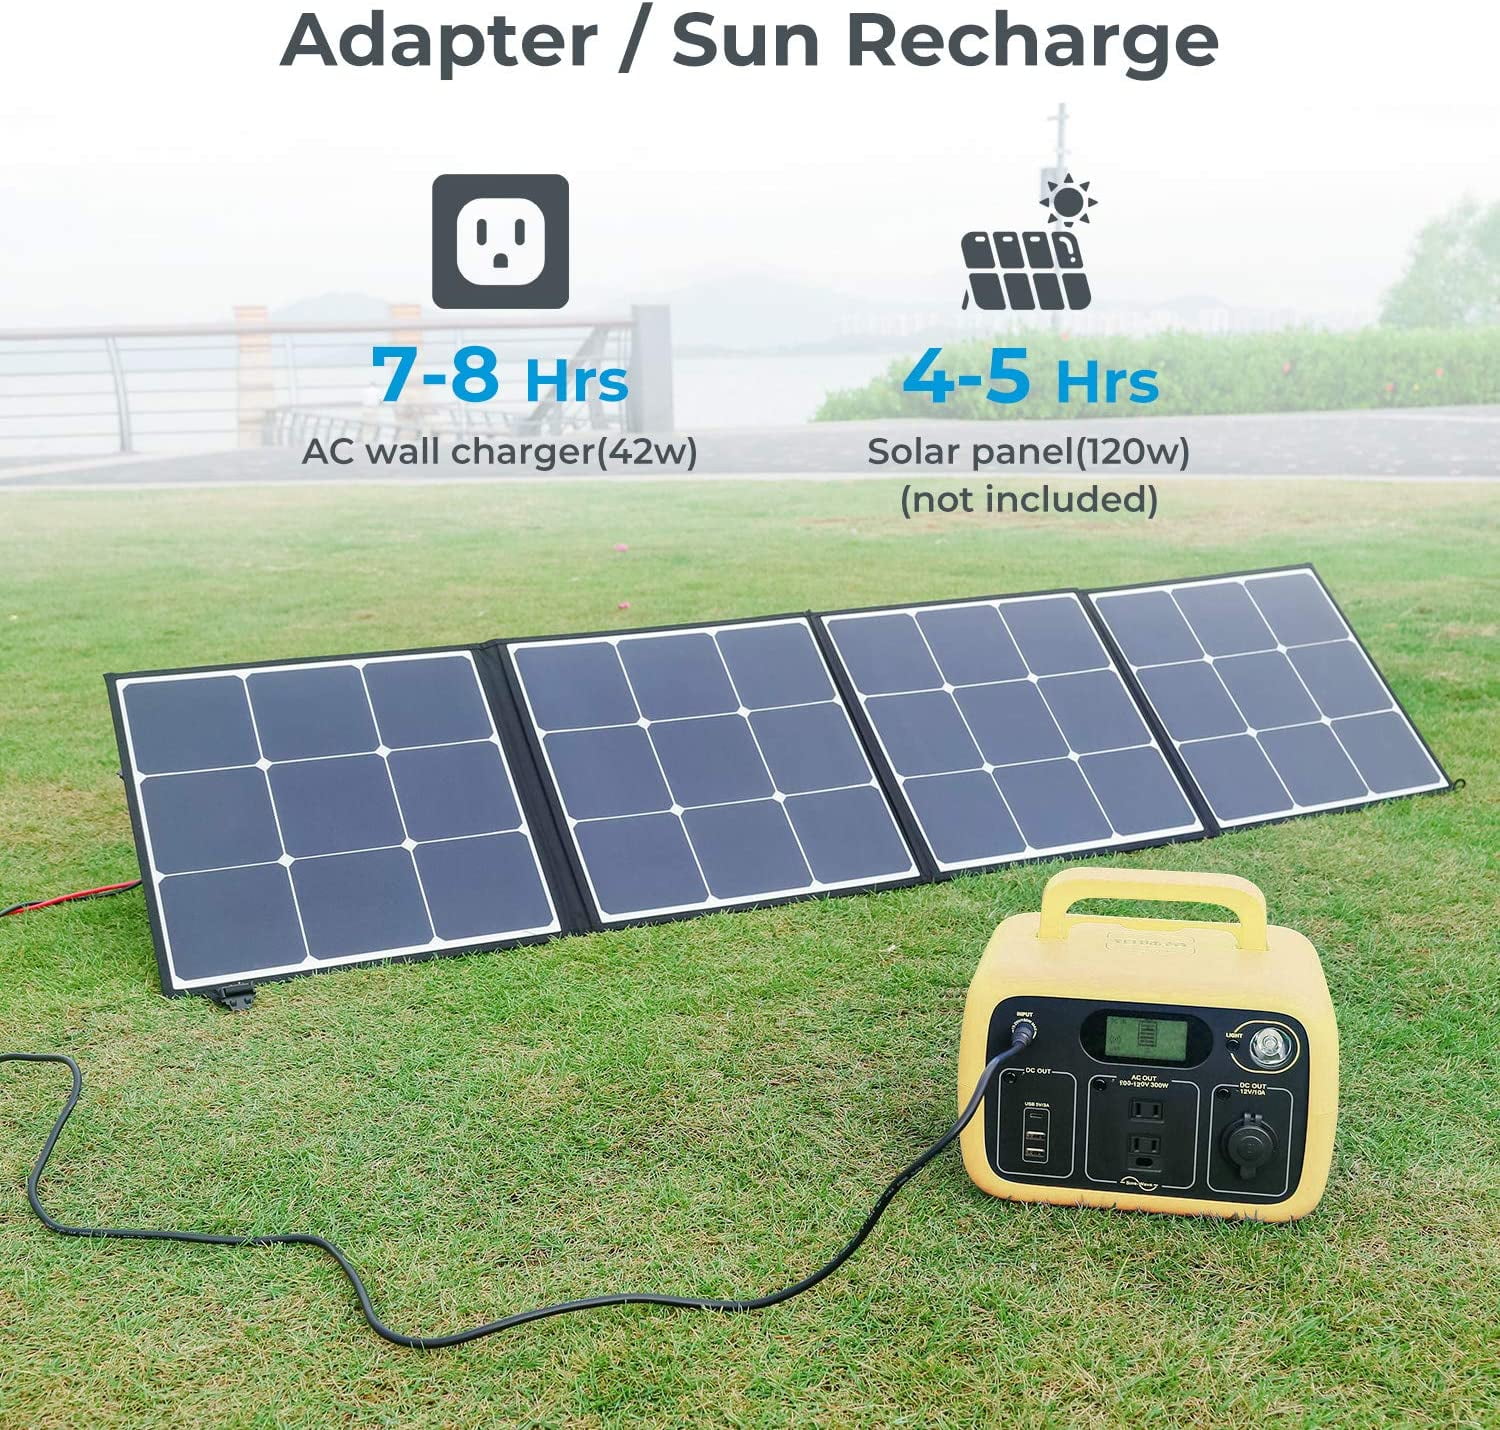 BLUETTI Portable Power Station AC30 300Wh Solar Generator w/2 AC Outlet 110V 300W Pure Sine Wave DC 12V /USB/Type-C Backup Battery Power Supply for Home,Travel,Camping,Emergency 